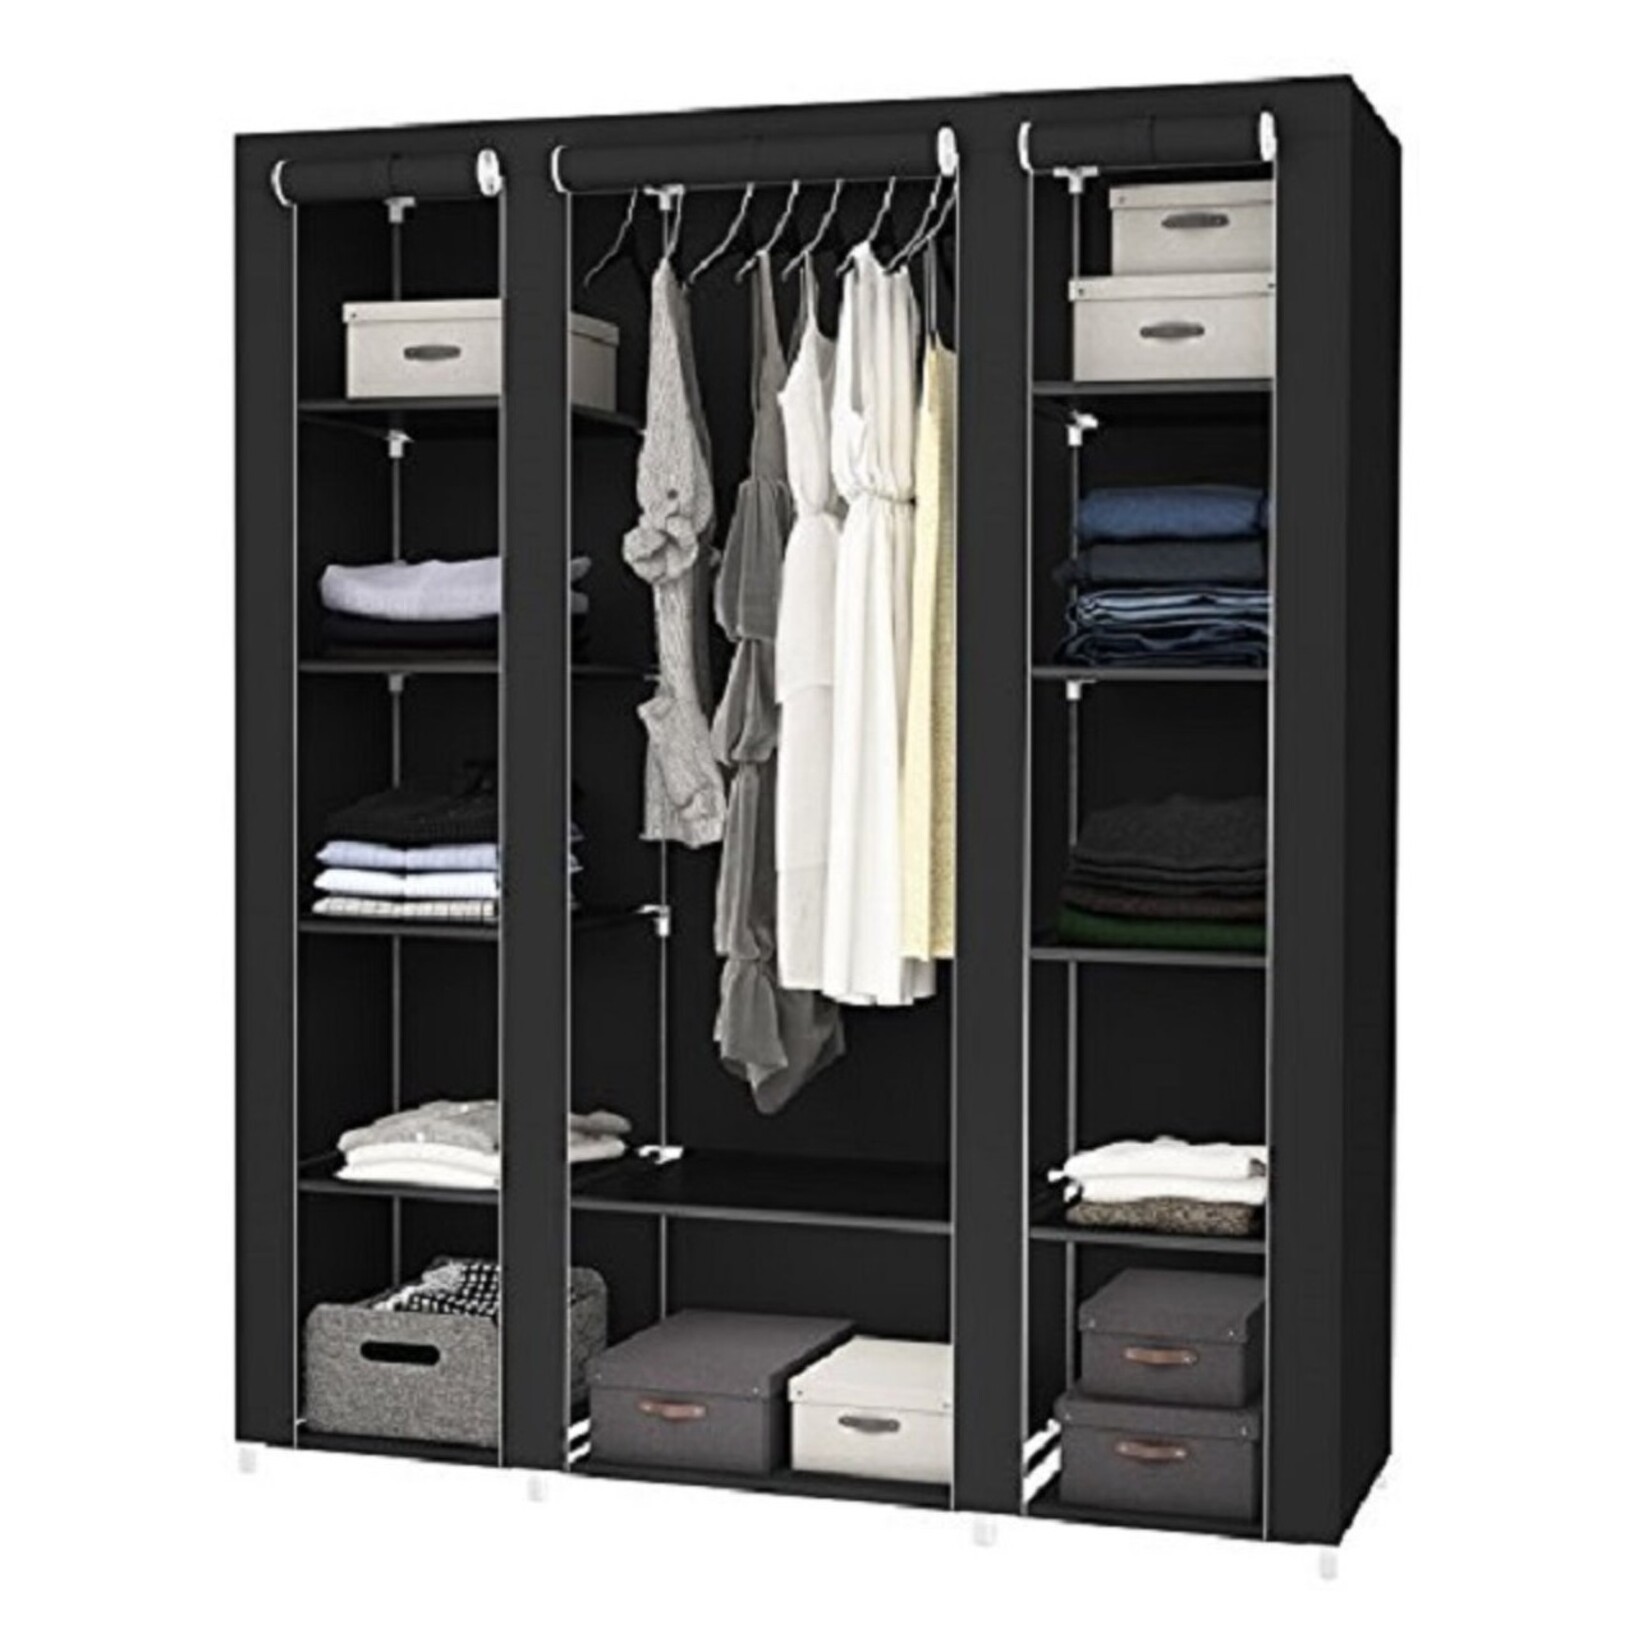 Bobbel Home Bobbel Home - Foldable wardrobe - with clothes rail